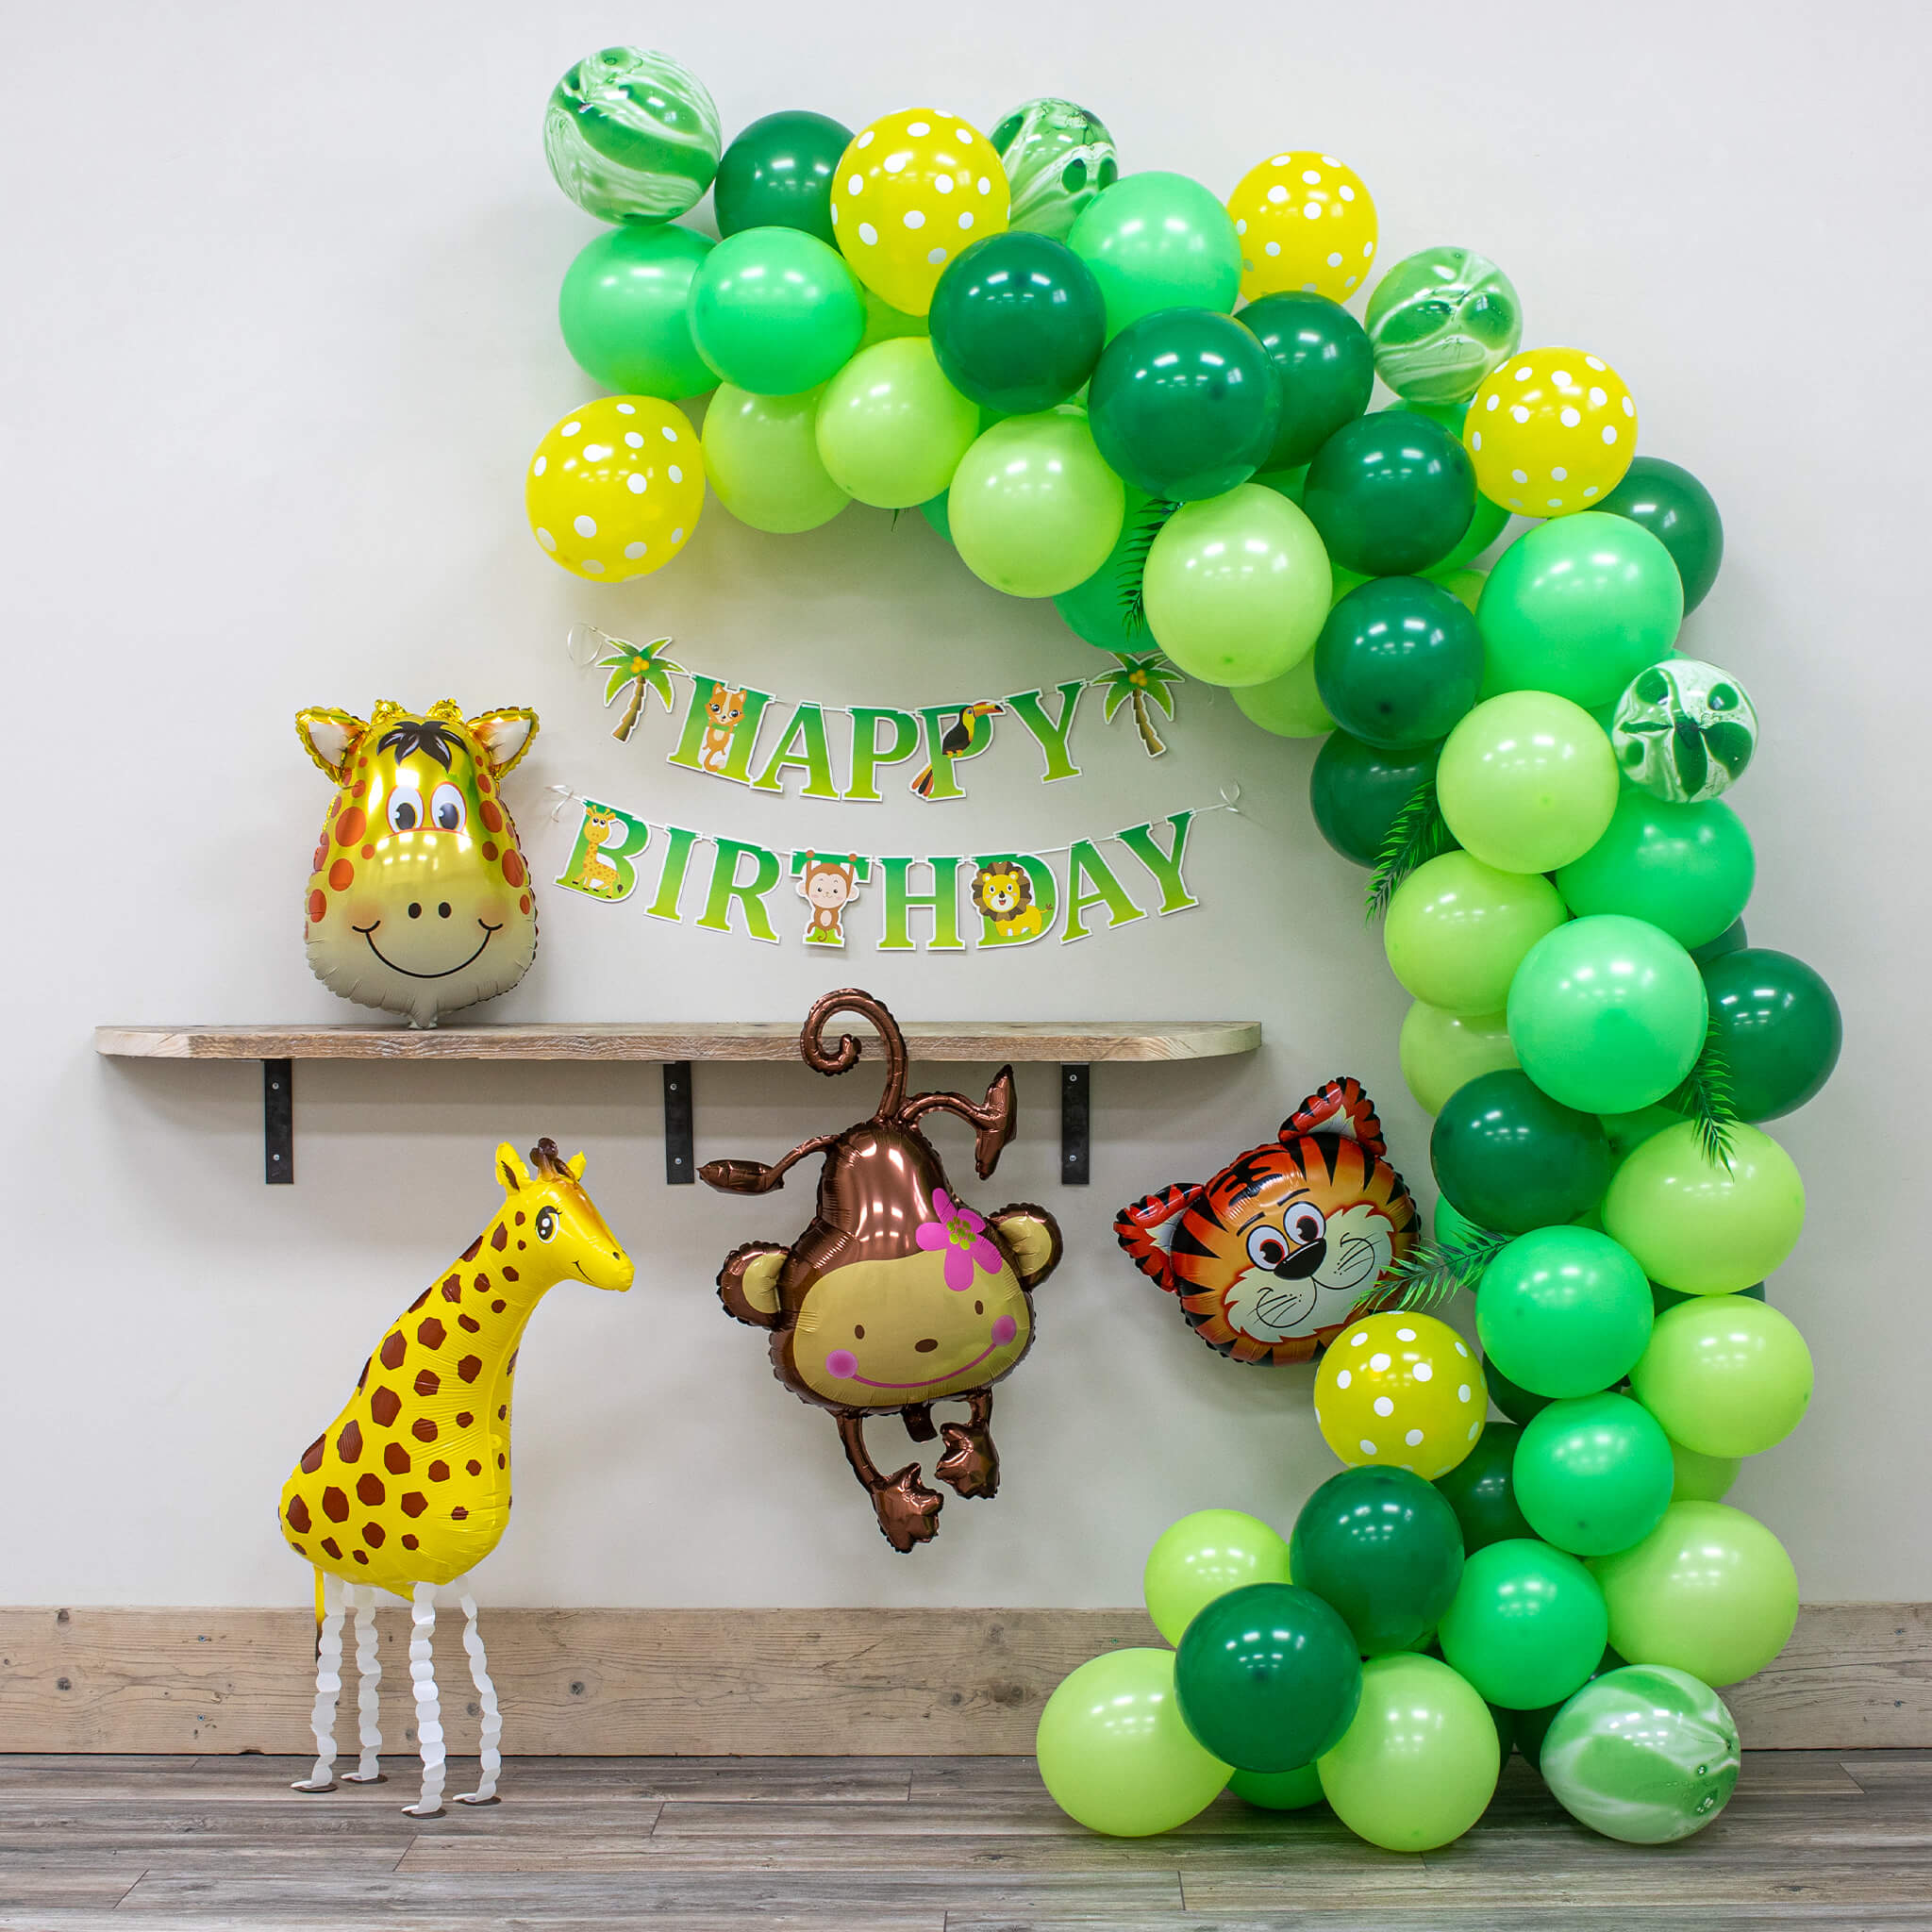 Jungle Themed 4th Birthday Balloon Arch Decoration DIY Kit - Includes 75+ Balloons (Green Numbers)